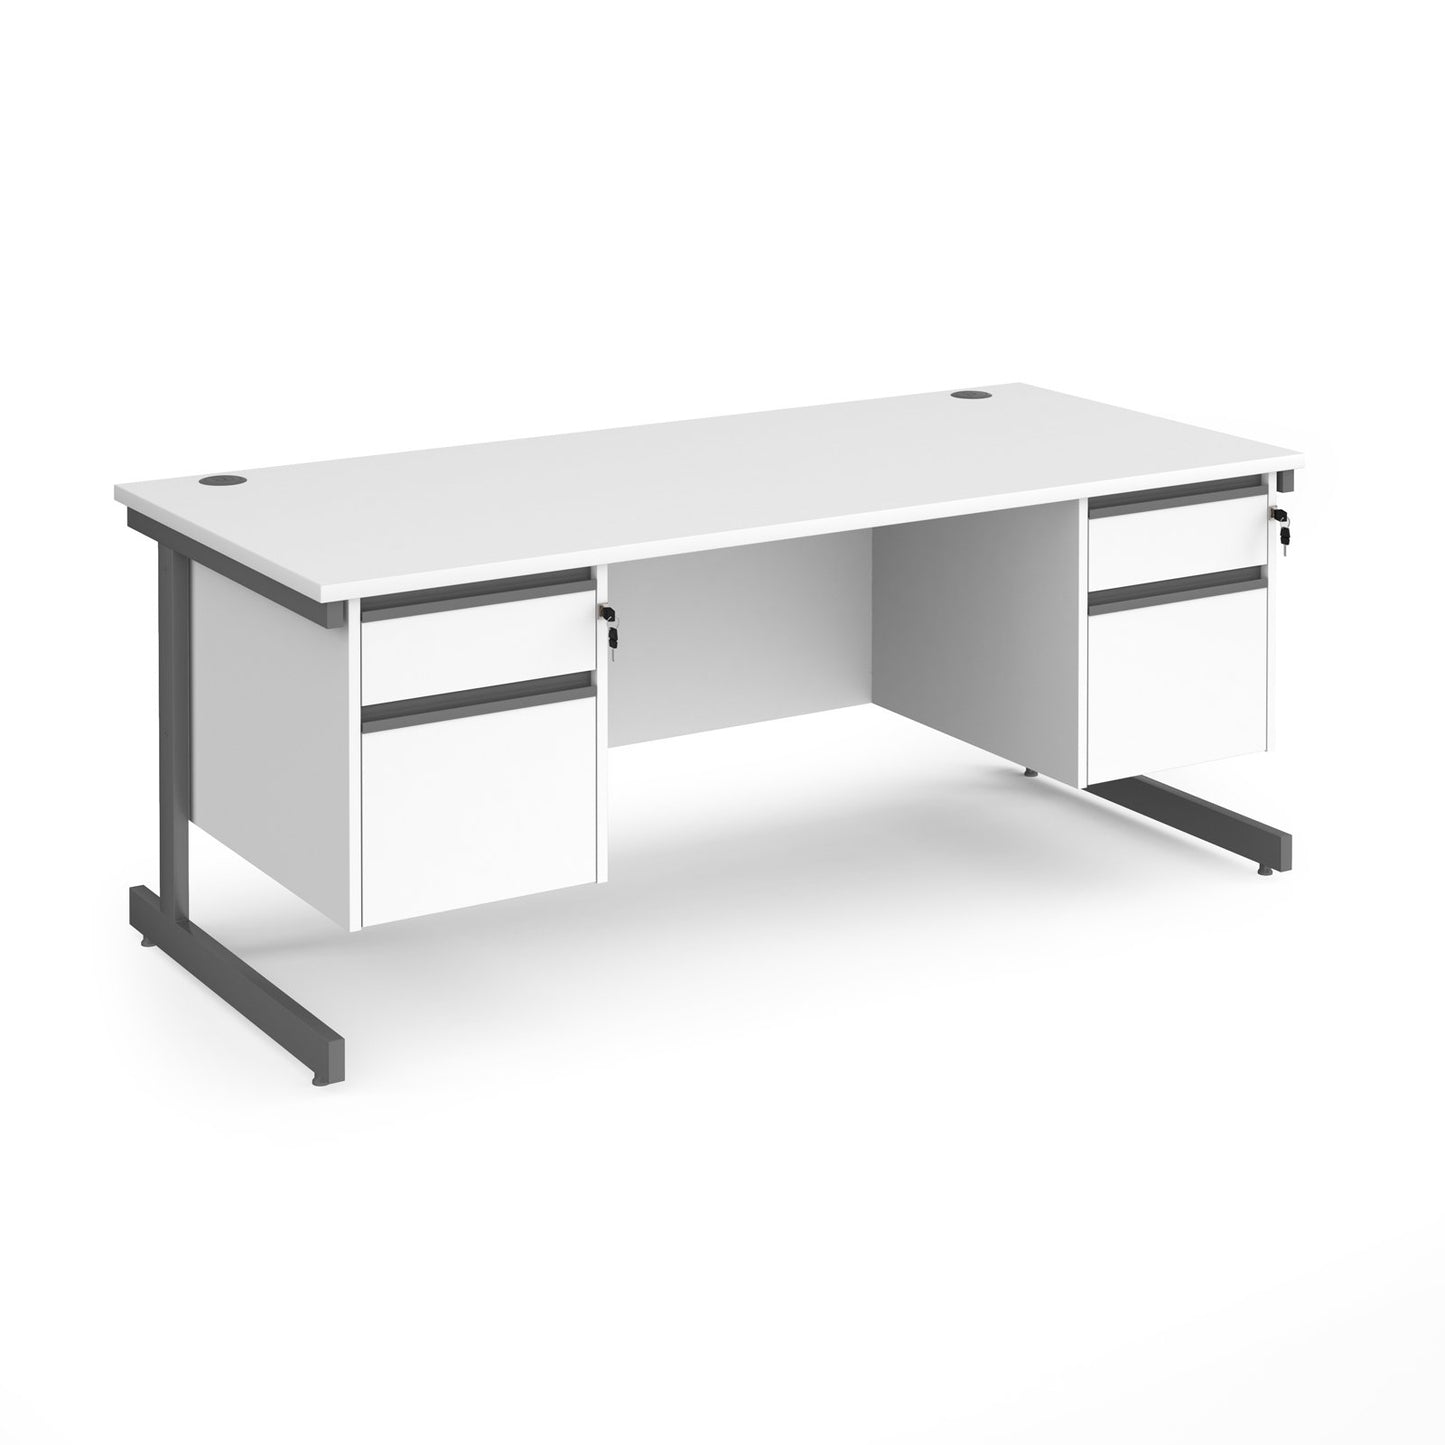 Contract 25 cantilever leg straight desk with 2 and 2 drawer peds